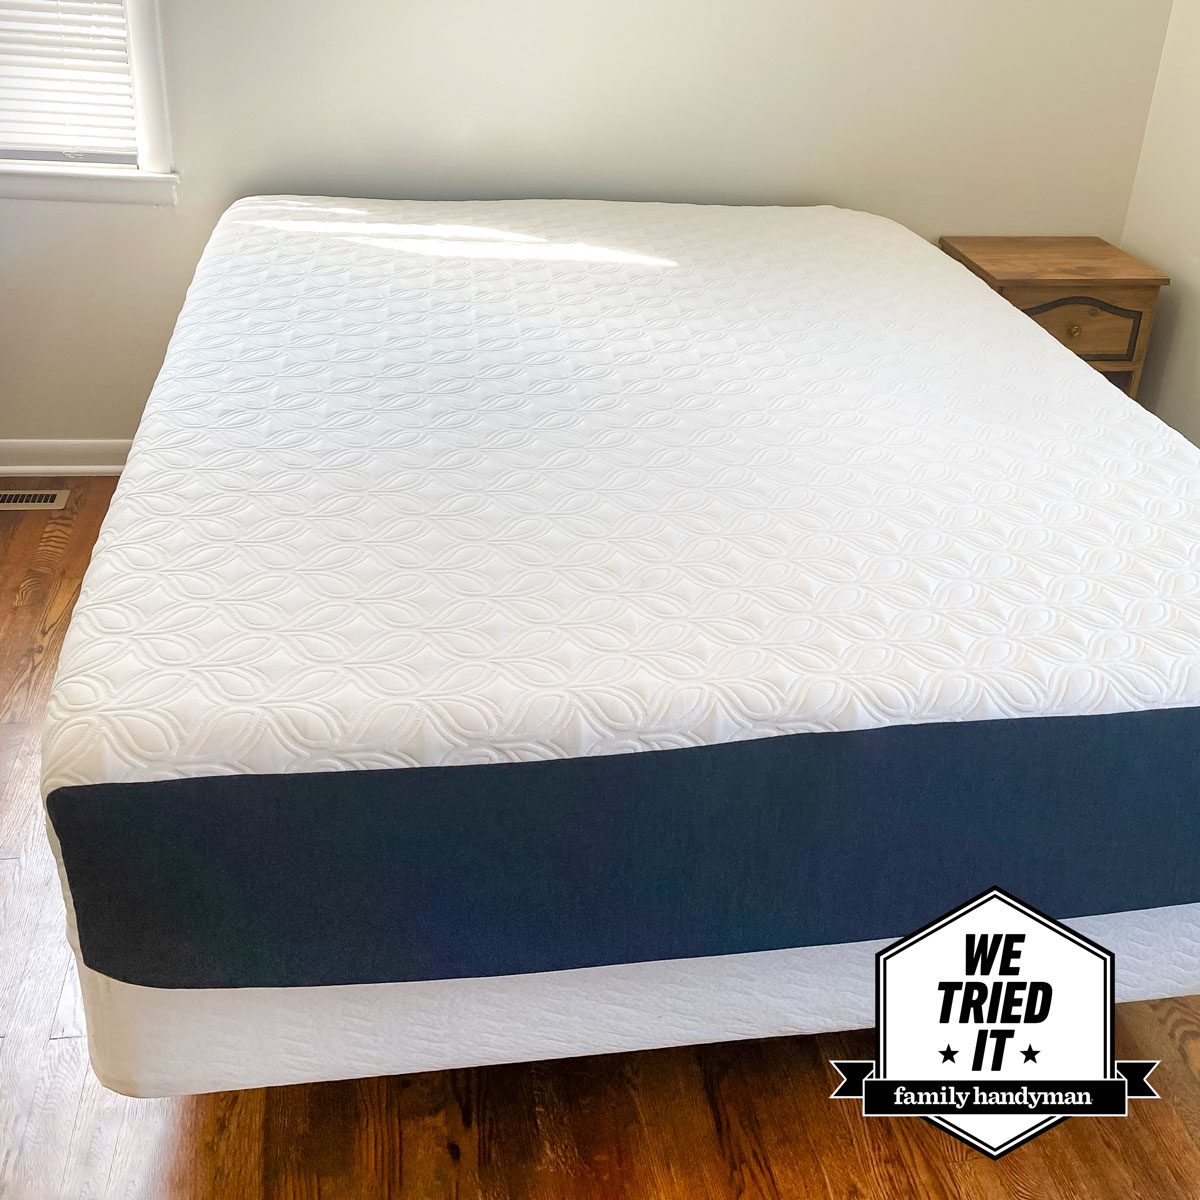 After 5 Months of Sleep Testing, Here's Our Review of the Cooling Hybrid Cocoon Chill Mattress